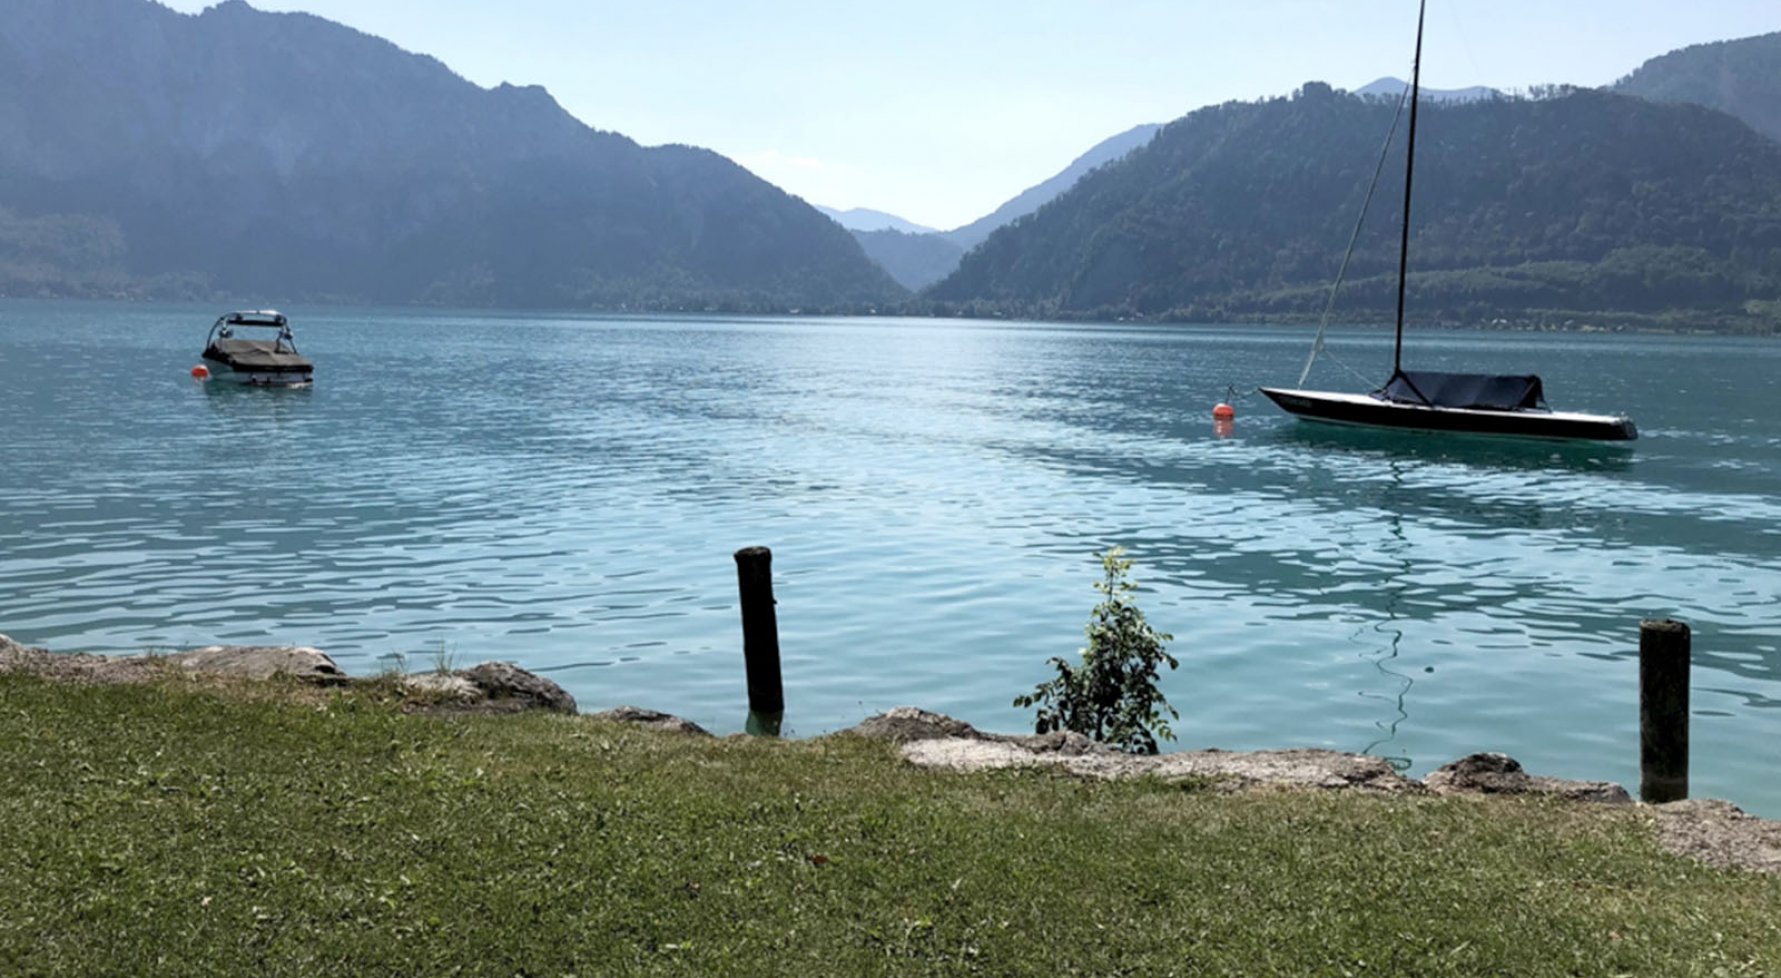 Property in 4866 Unterach am Attersee / Salzkammergut: New building project with lake view to the Attersee! - picture 1